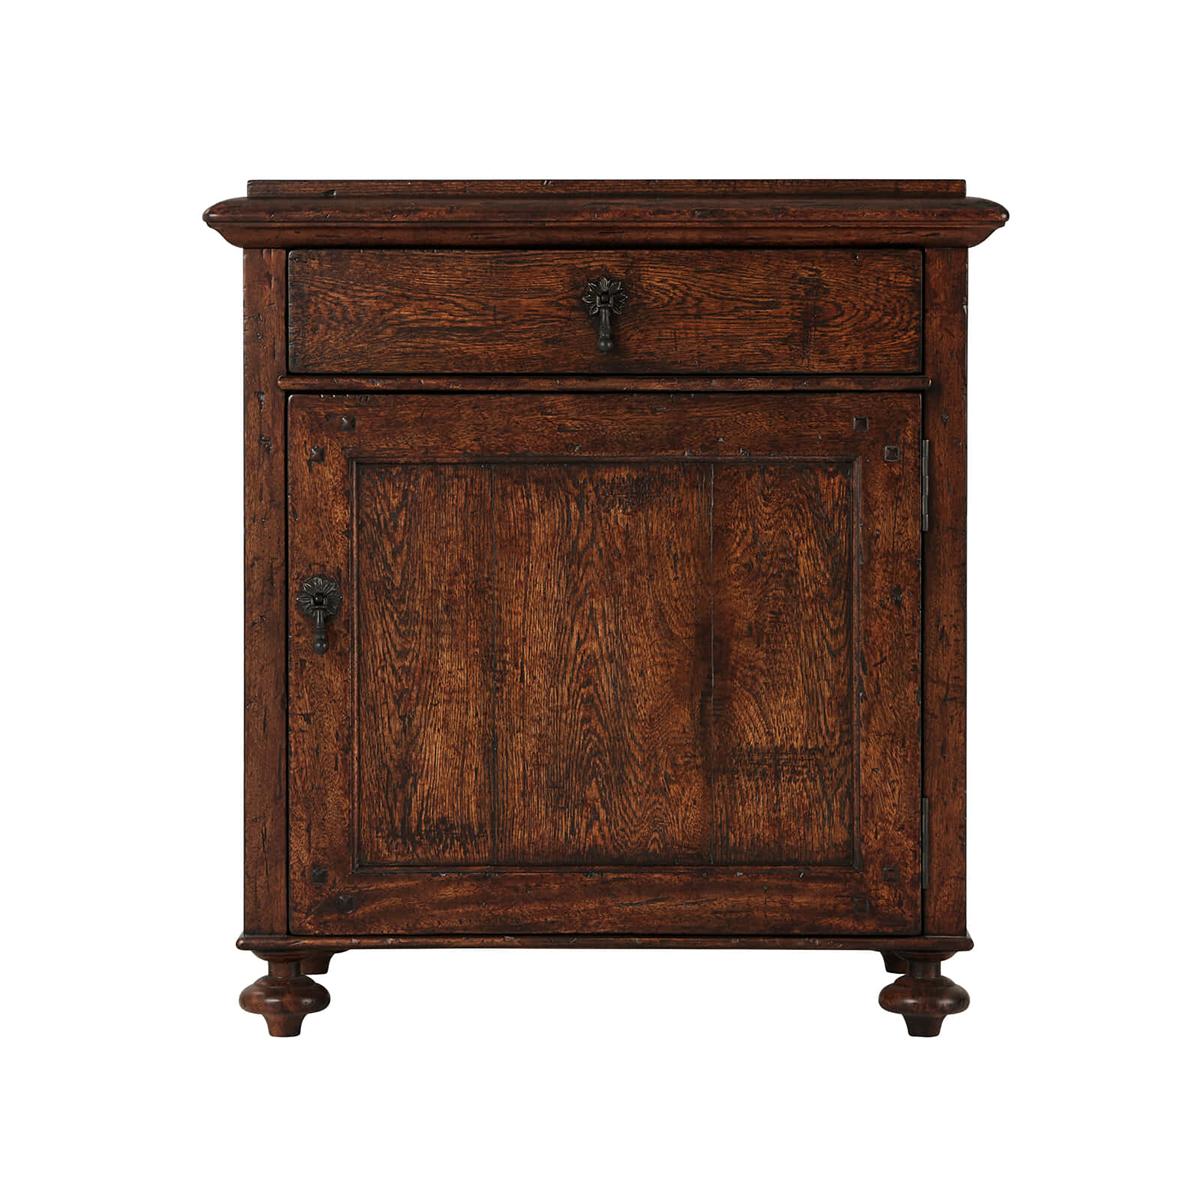 A Country rustic oak bedside table featuring a molded oak top above a frieze drawer and cabinet door with bronze-finished pendant handles and finely turned feet.

Dimensions: 26